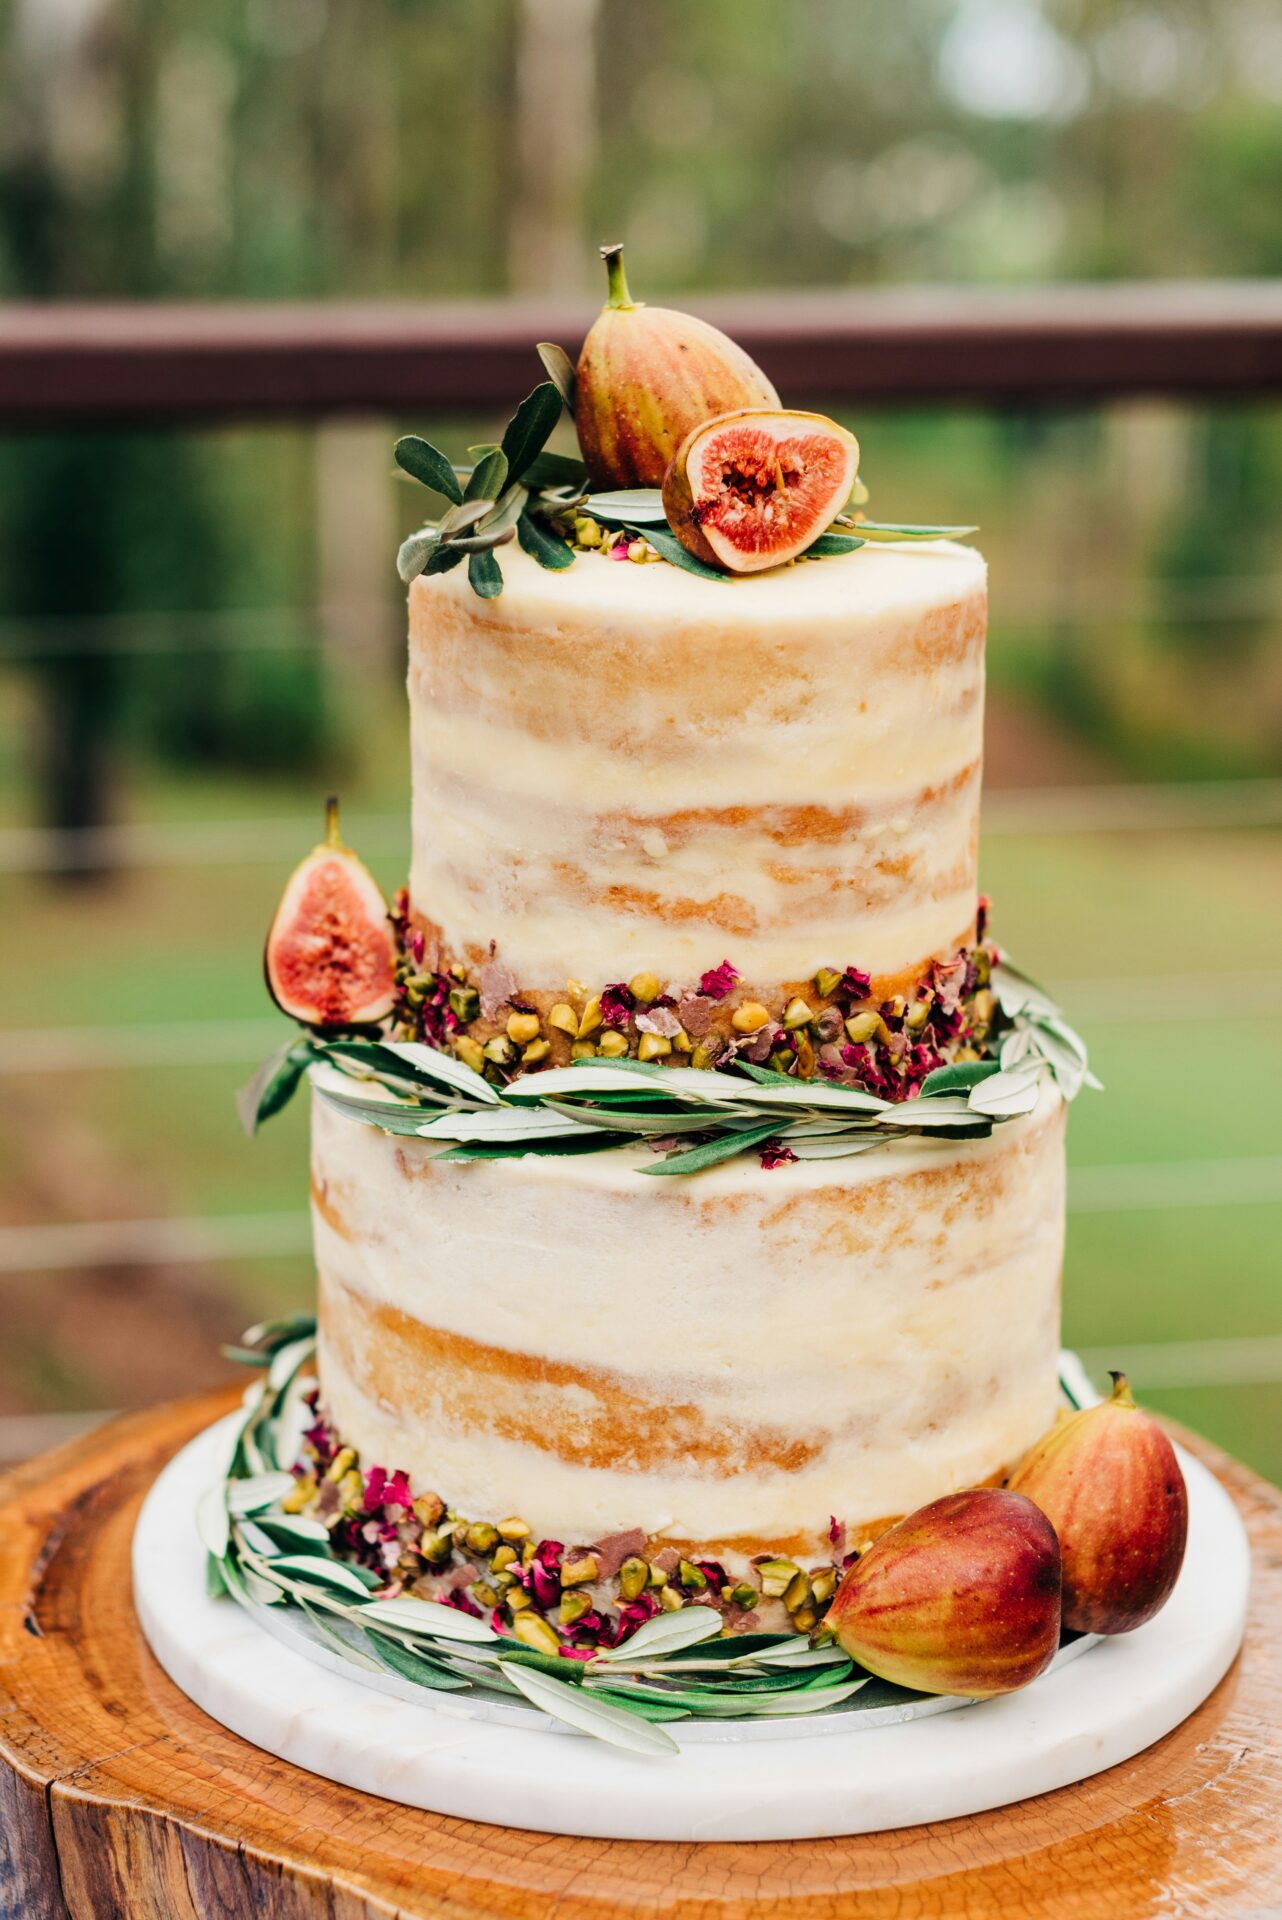 A wedding cake with greenery and fruit.